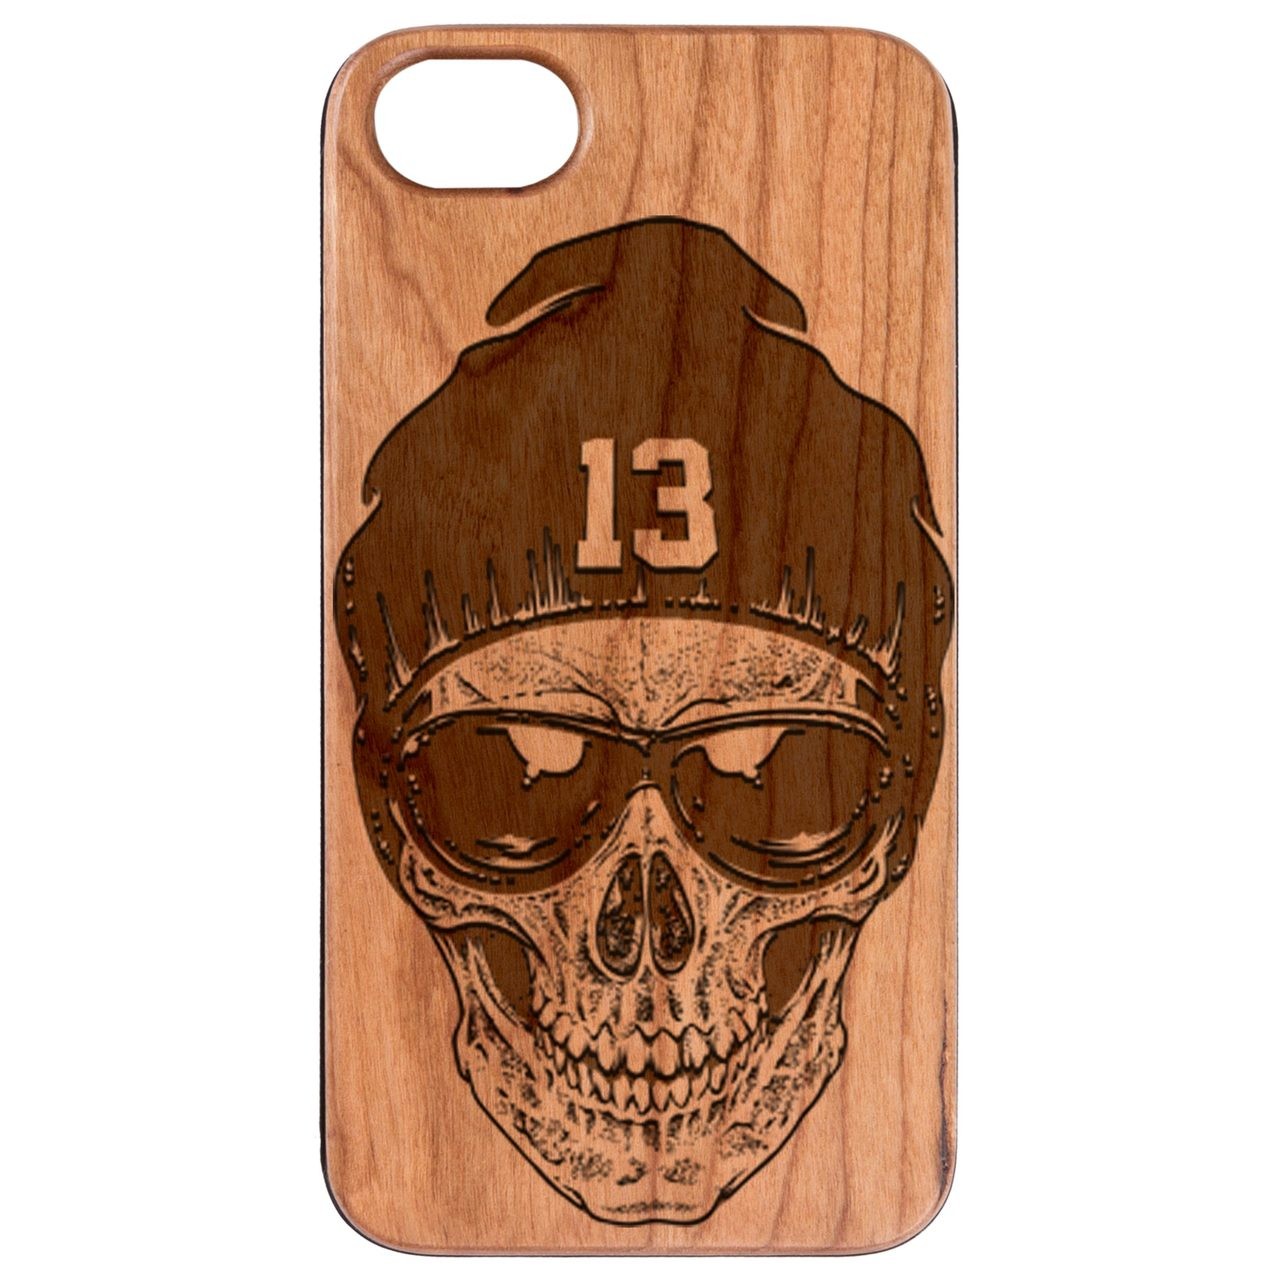  Skull with Hat - Engraved - Wooden Phone Case - IPhone 13 Models